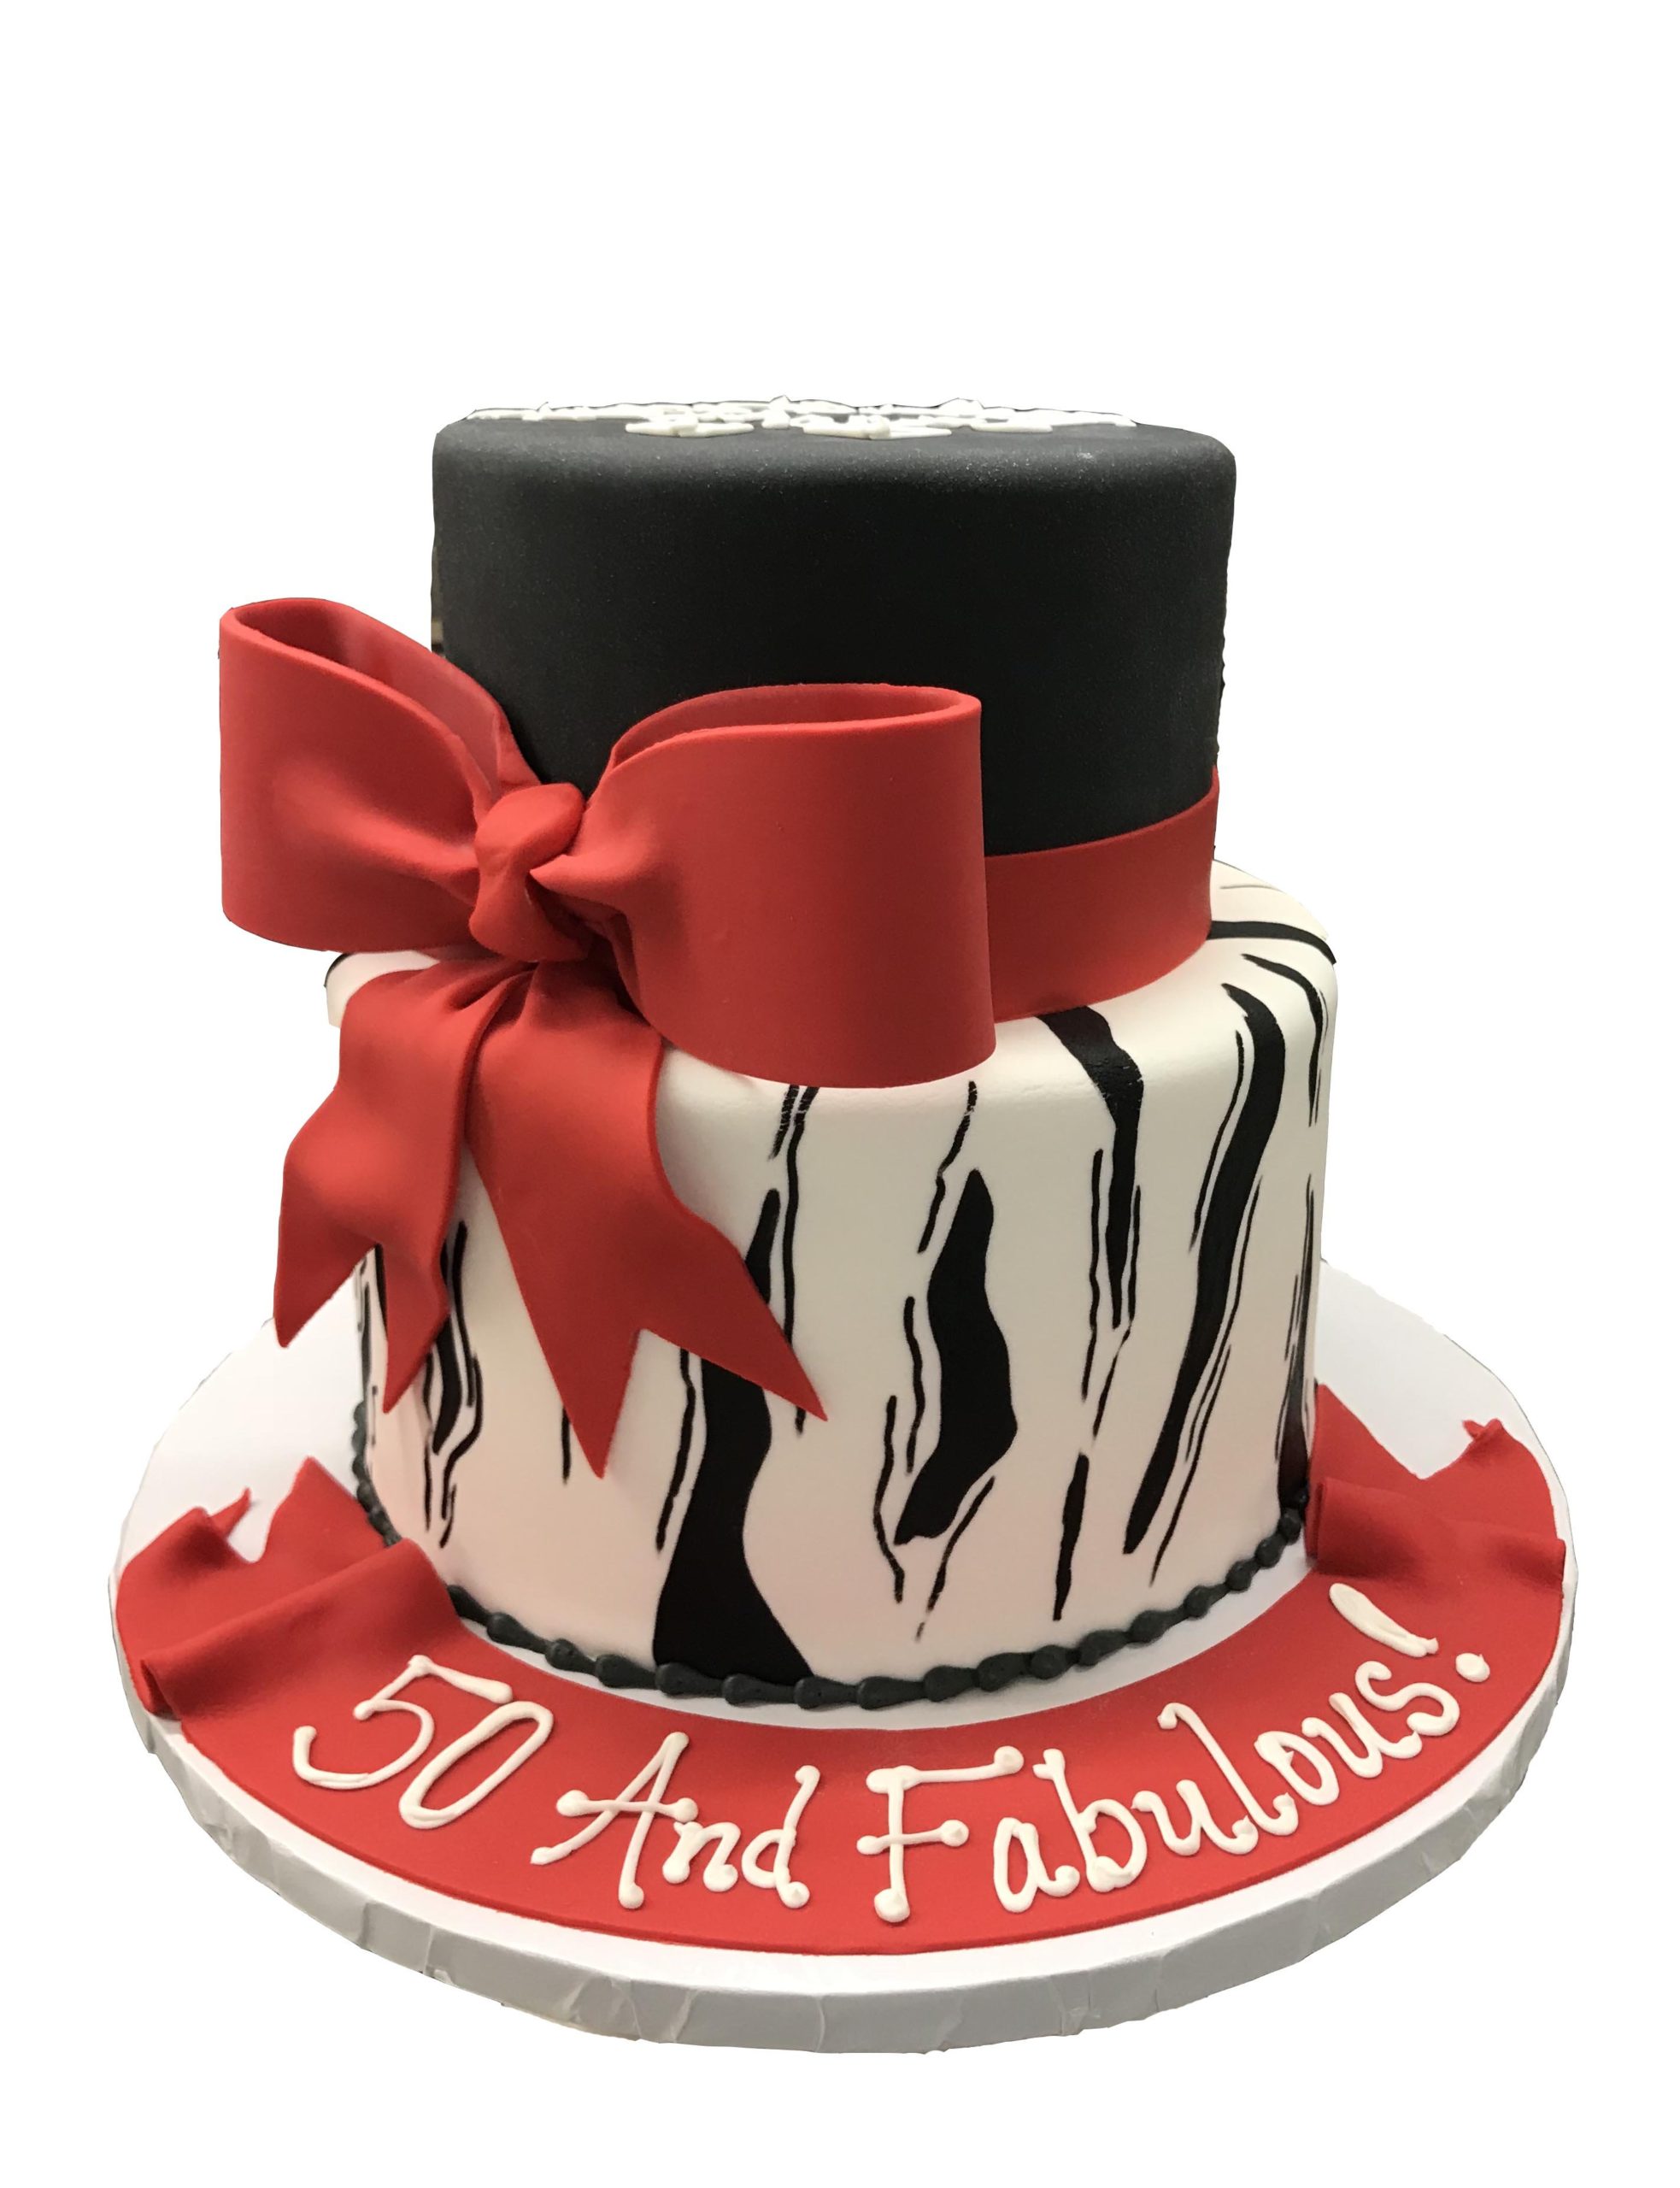 AB023. Two tier zebra striped cake with a big red gumpaste bow